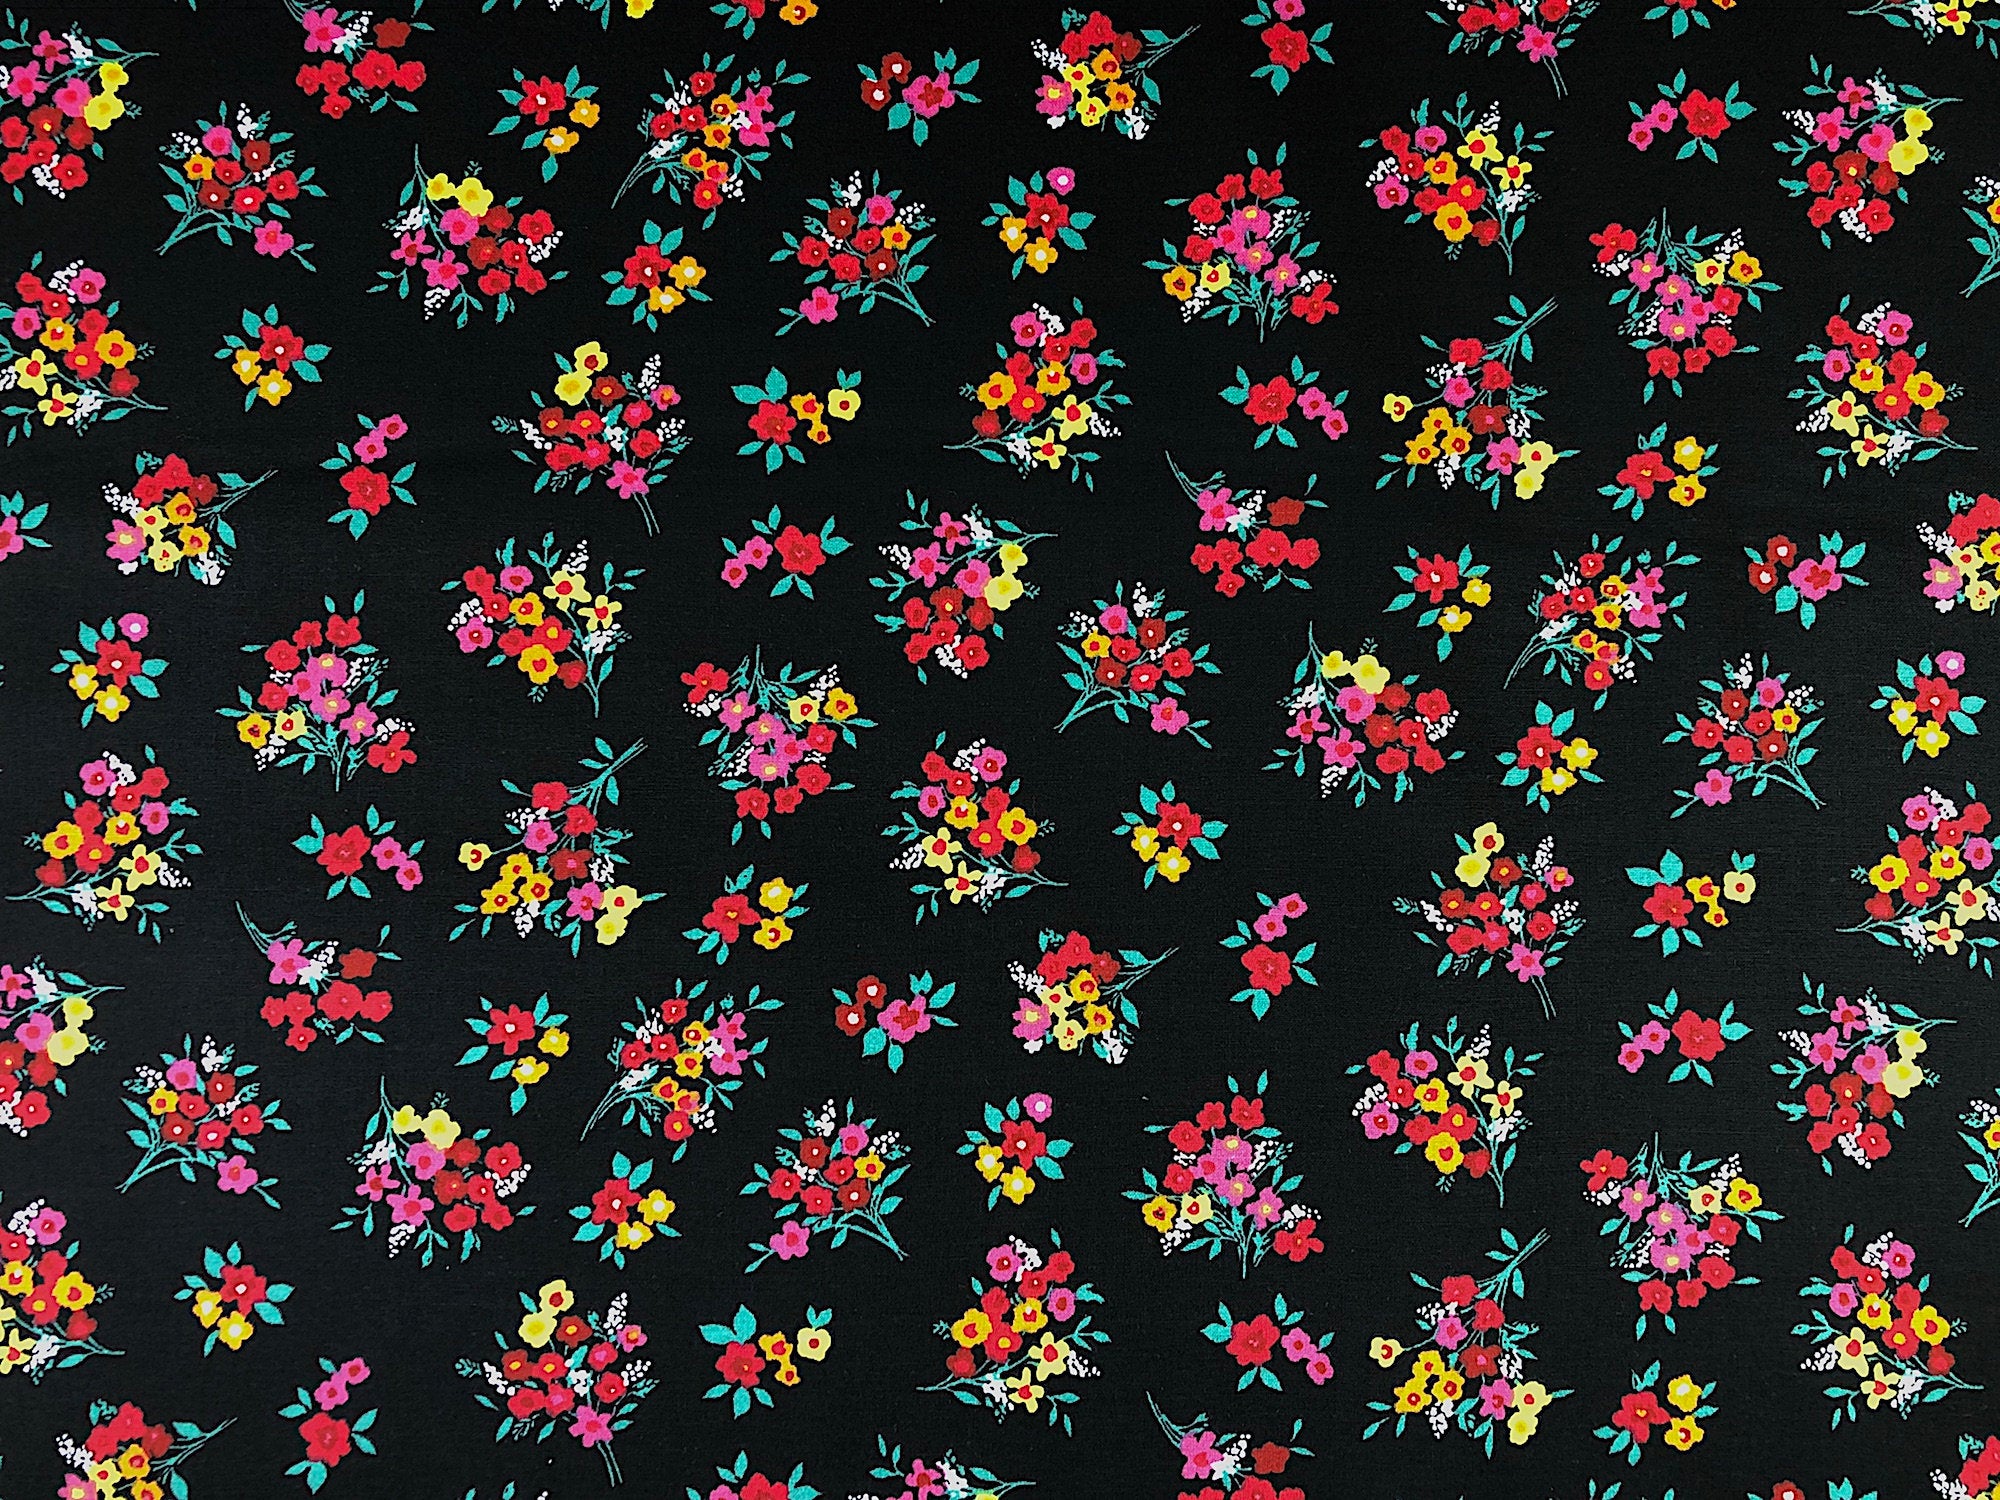 Black cotton fabric covered with bouquets of flowers.